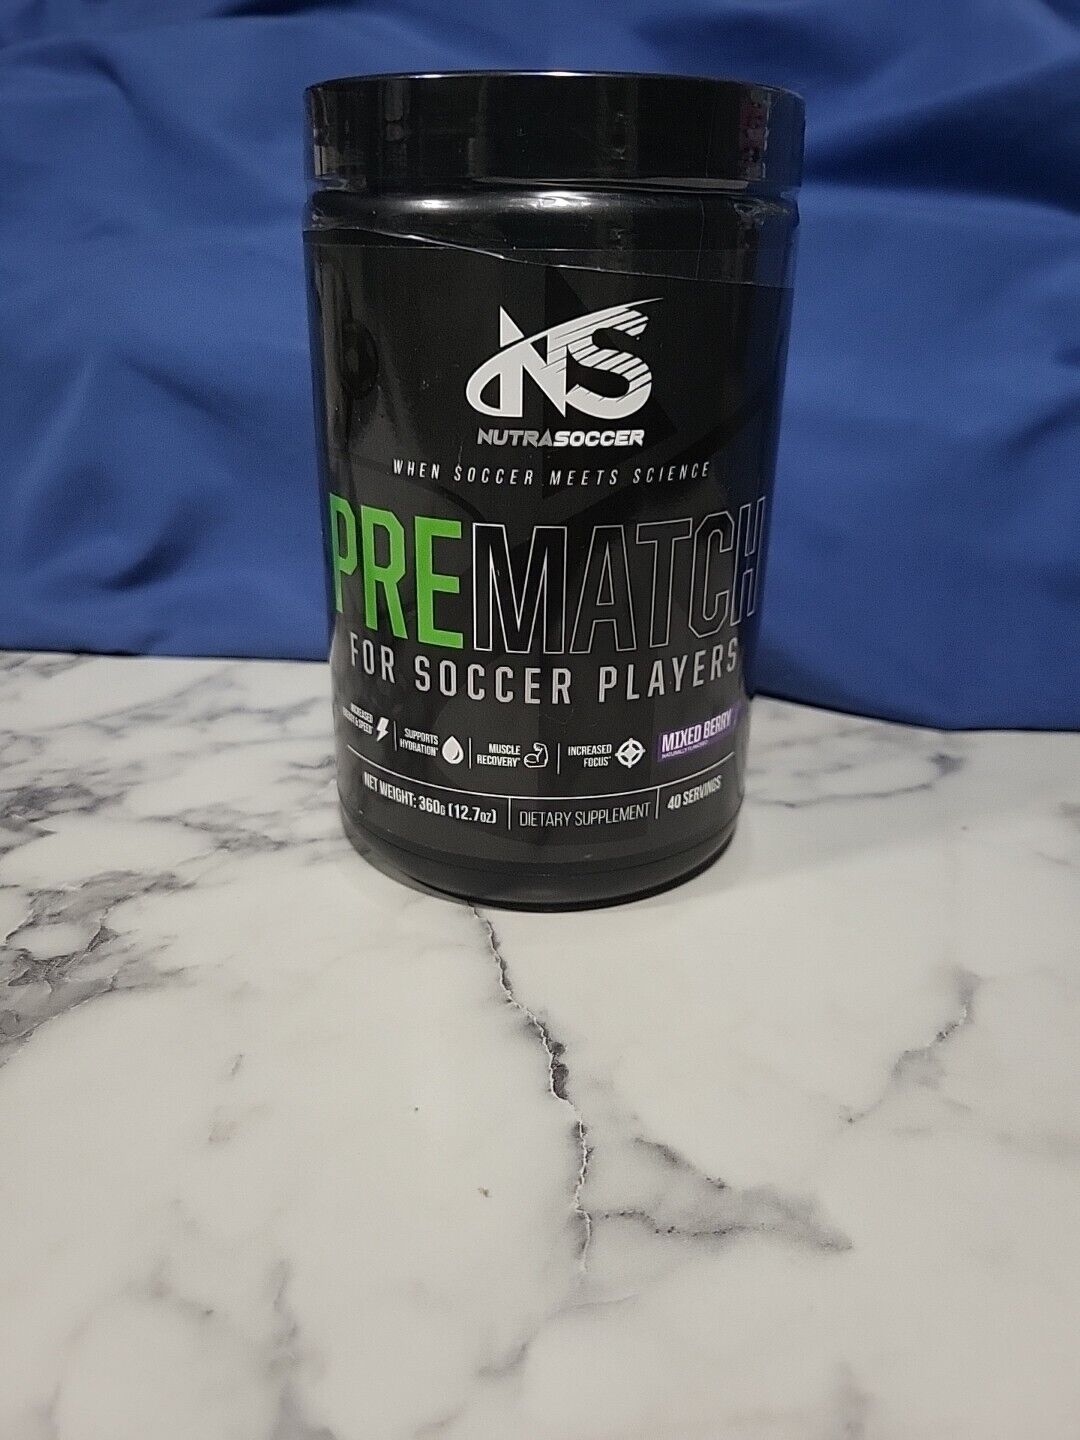 NutraSoccer PREMATCH Powder for Soccer Players - Boost Performance Exp. 3/25